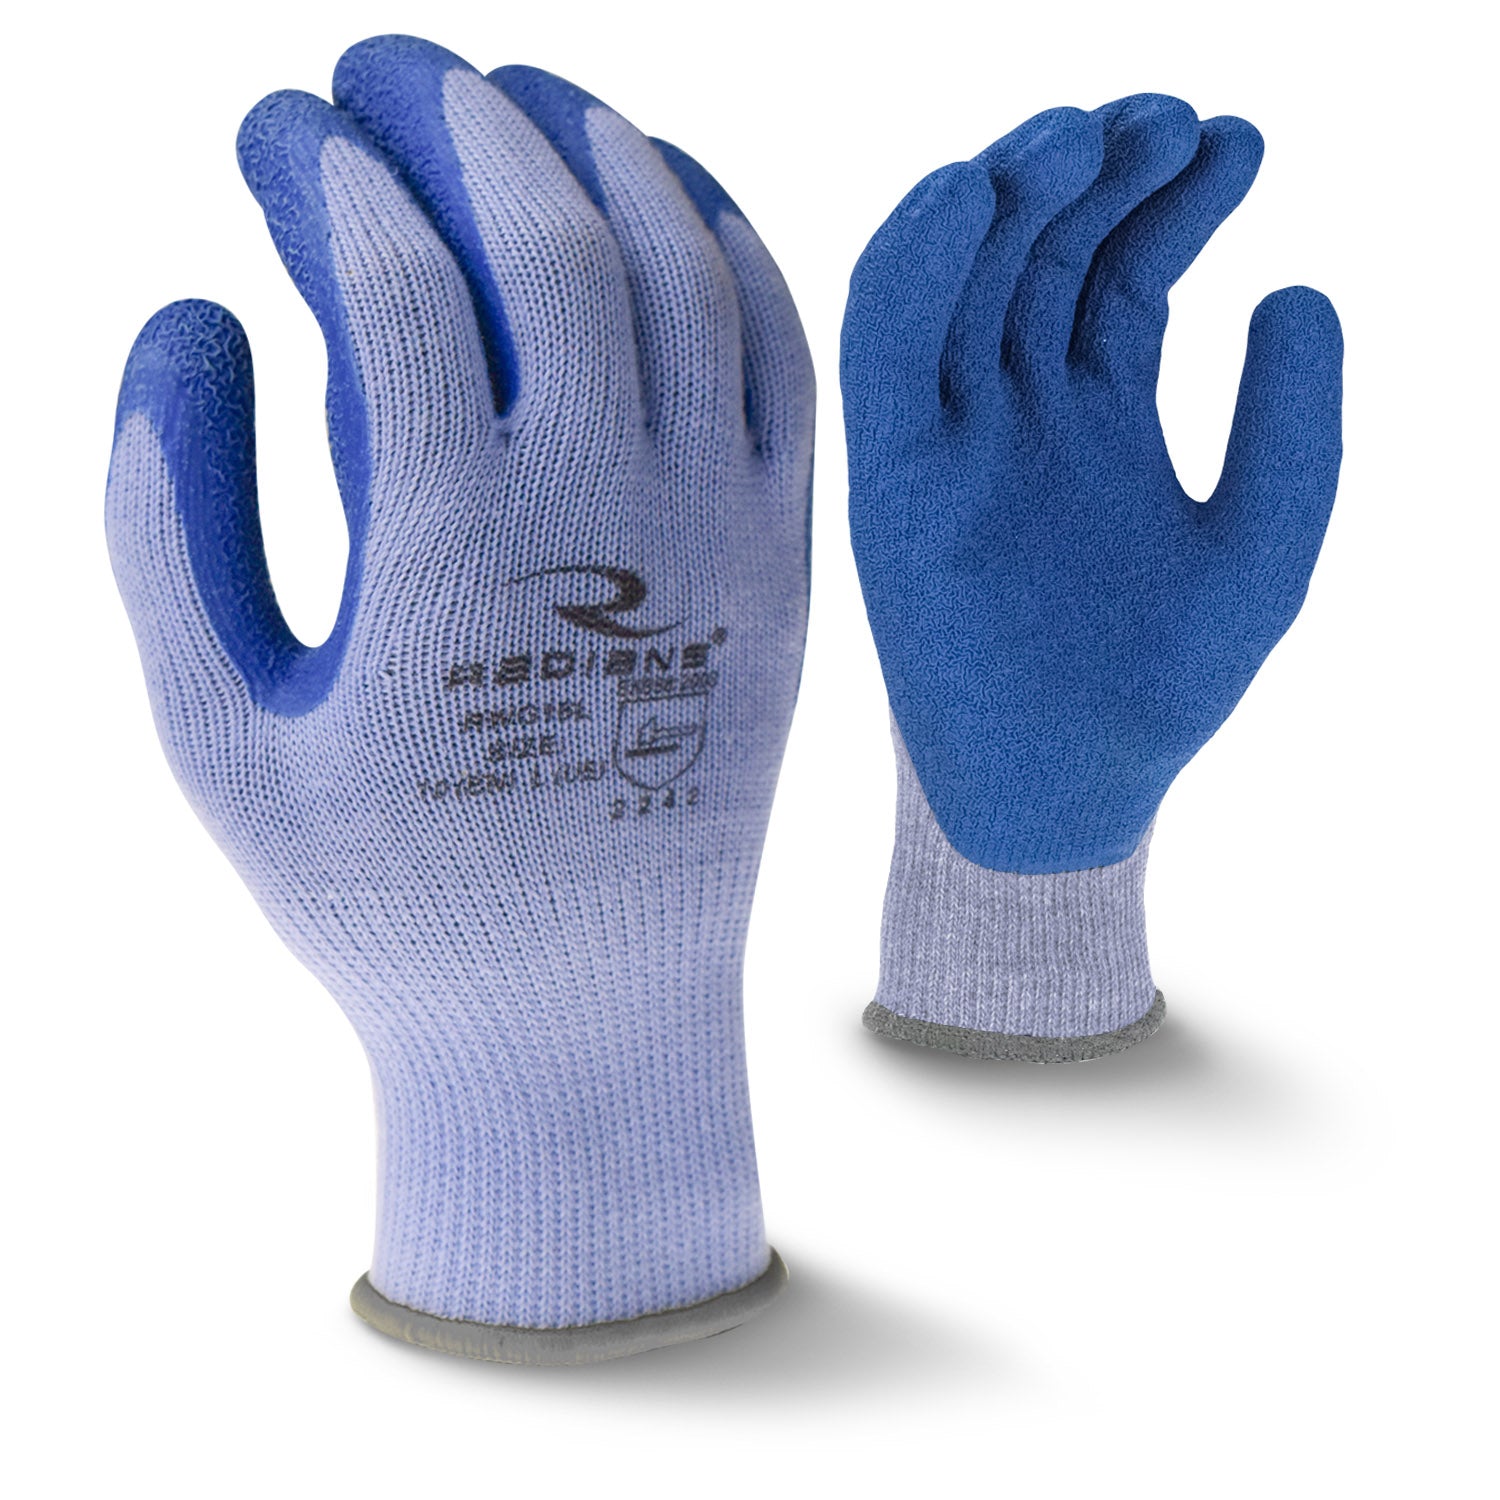 Radians RWG16 Crinkle Latex Palm Coated Glove-eSafety Supplies, Inc